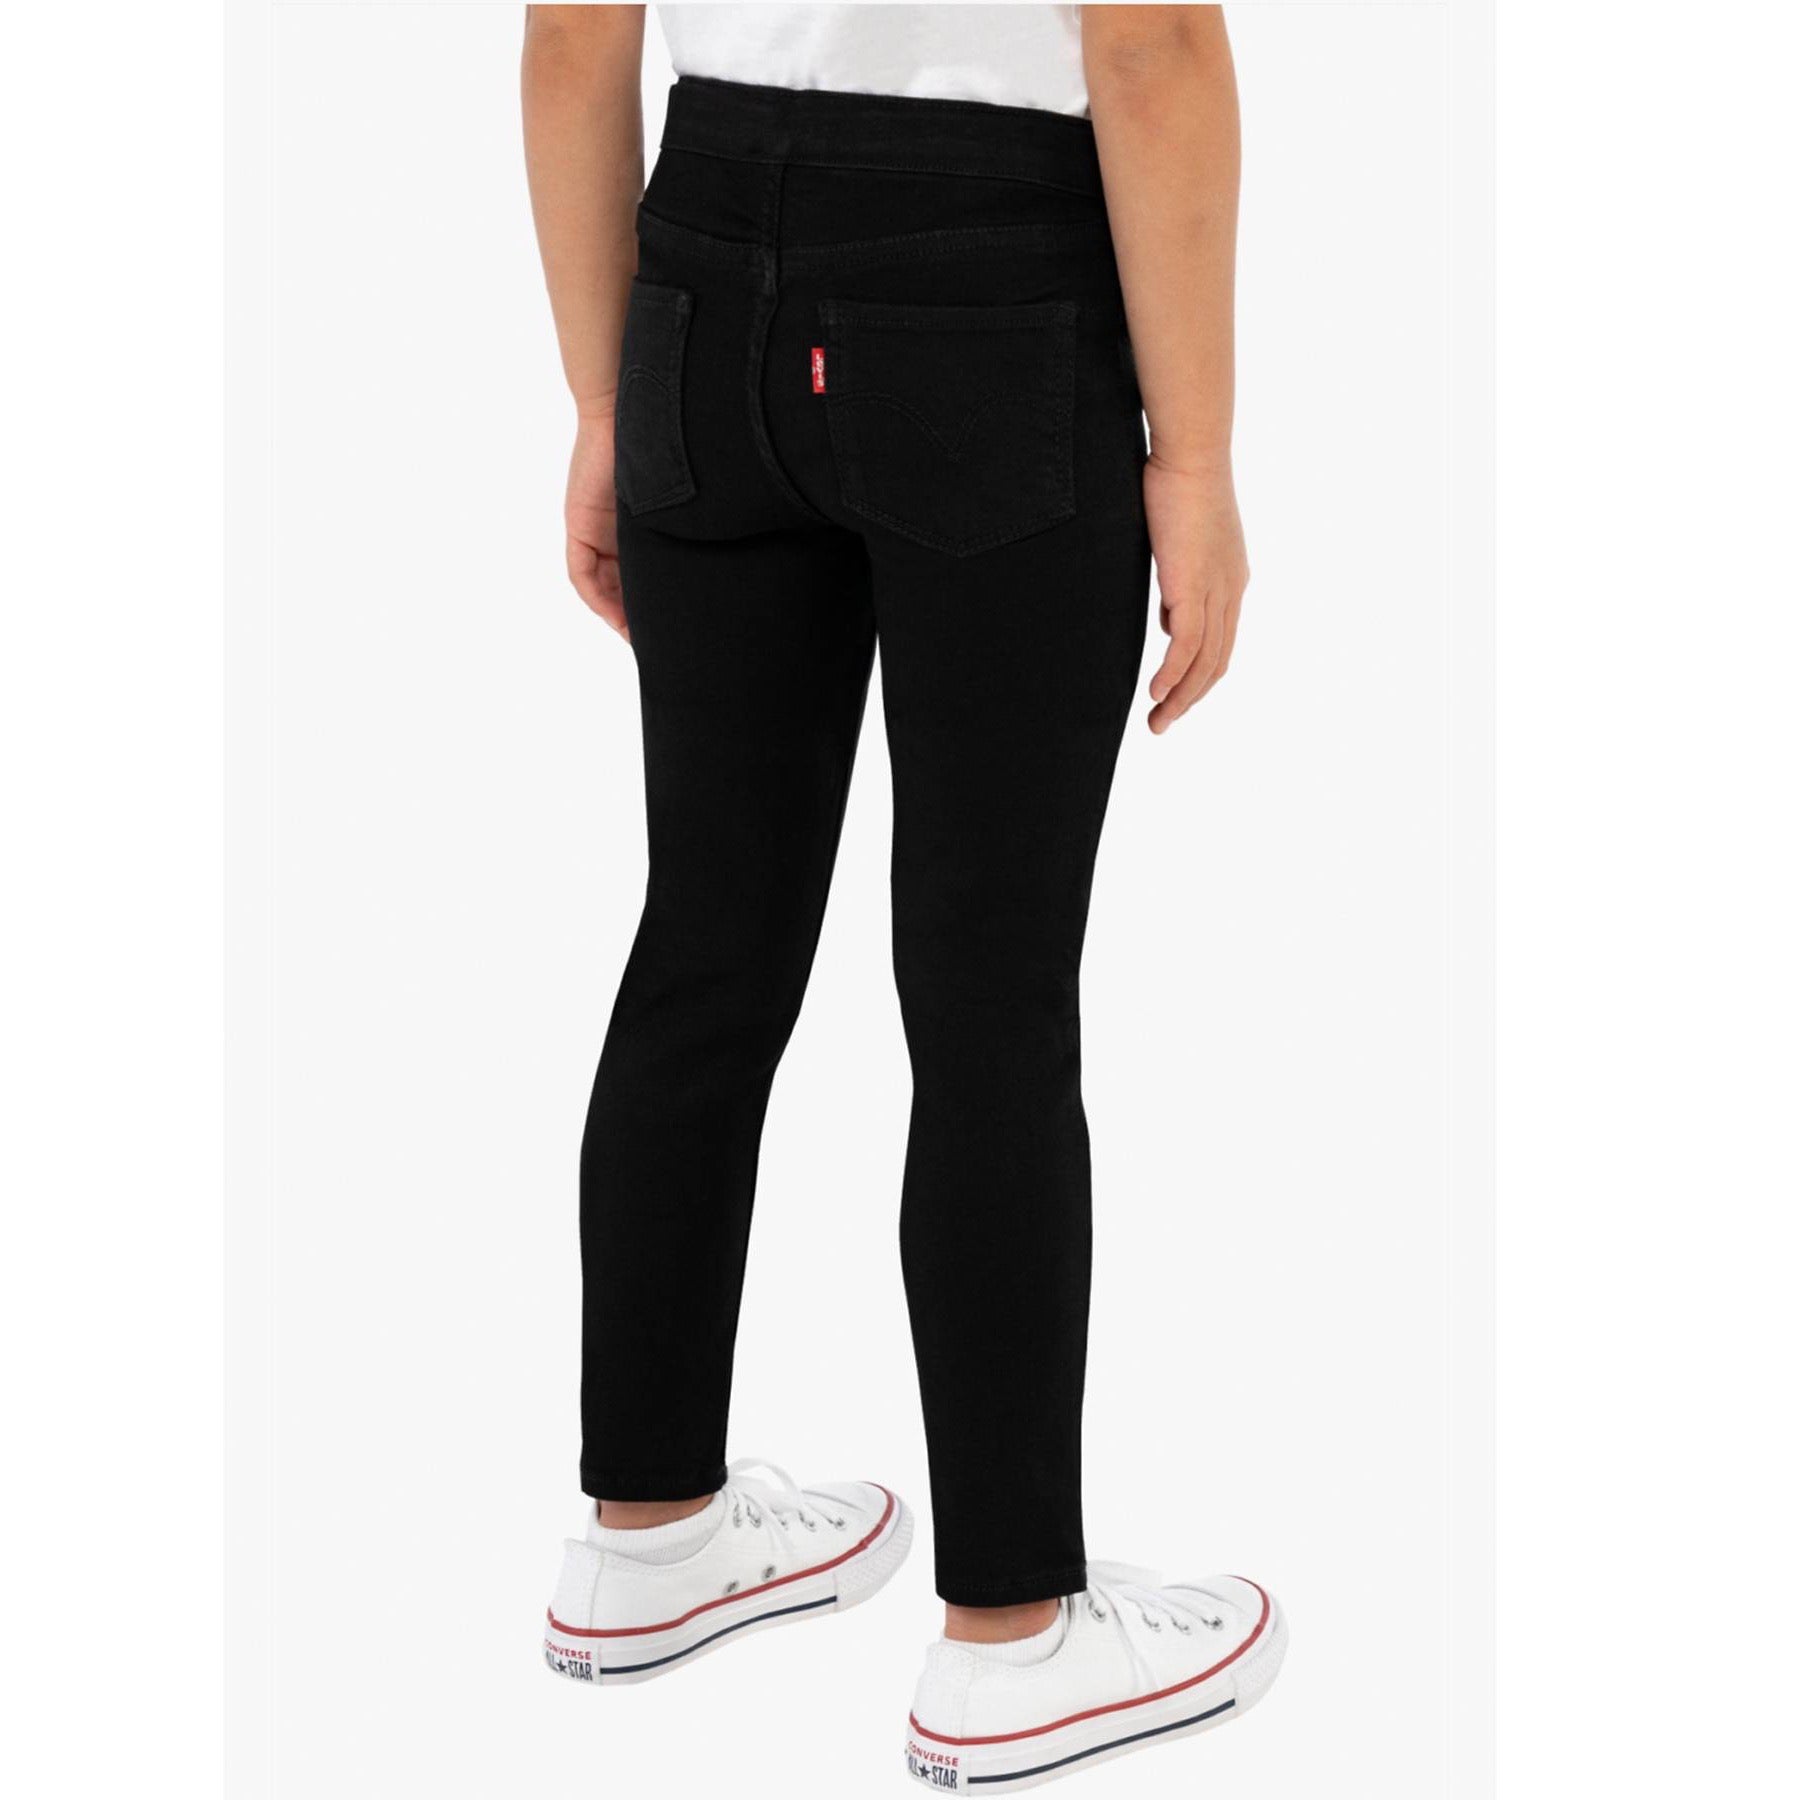 Levis Pull On Jeggings 4Ea559-023 Black Clothing 10YRS / Black,12YRS / Black,14YRS / Black,16YRS / Black